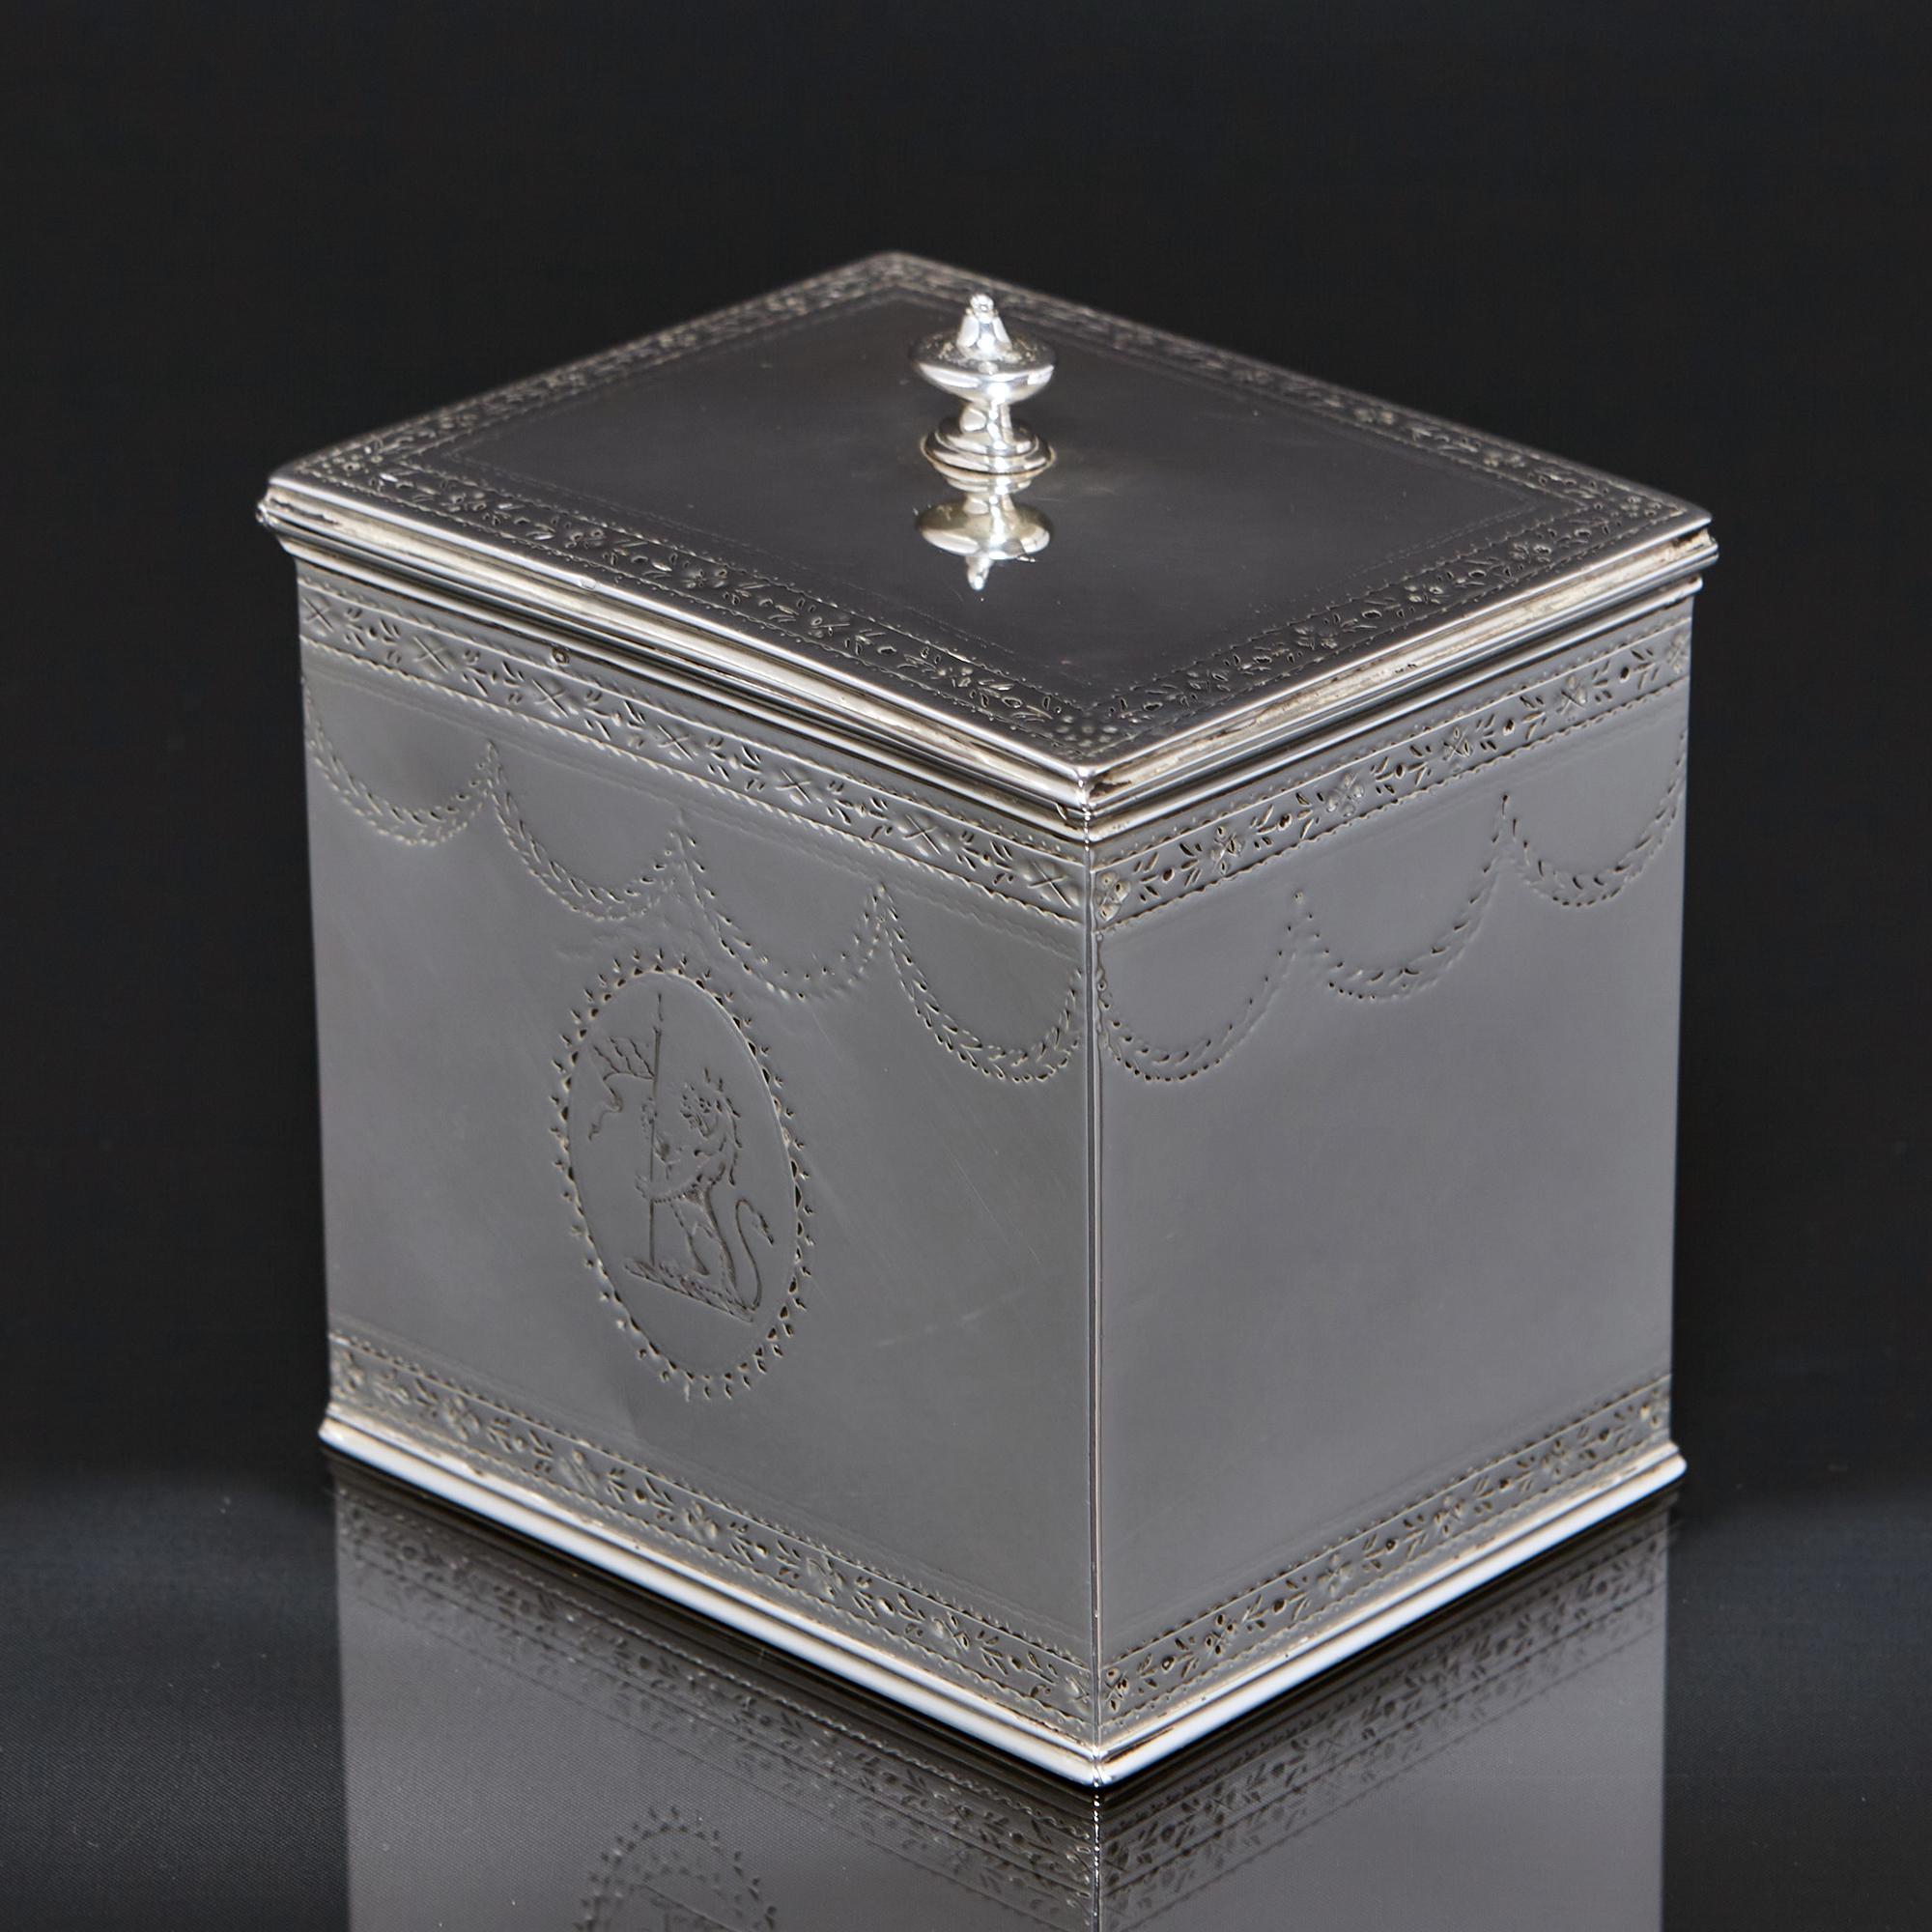 Classic late 18th century silver tea caddy of oblong form, and featuring delicately hand engraved bands and swags around the sides, and a flip cover surmounted by an oval, urn-shaped finial. 

One side face of the caddy is engraved with a family